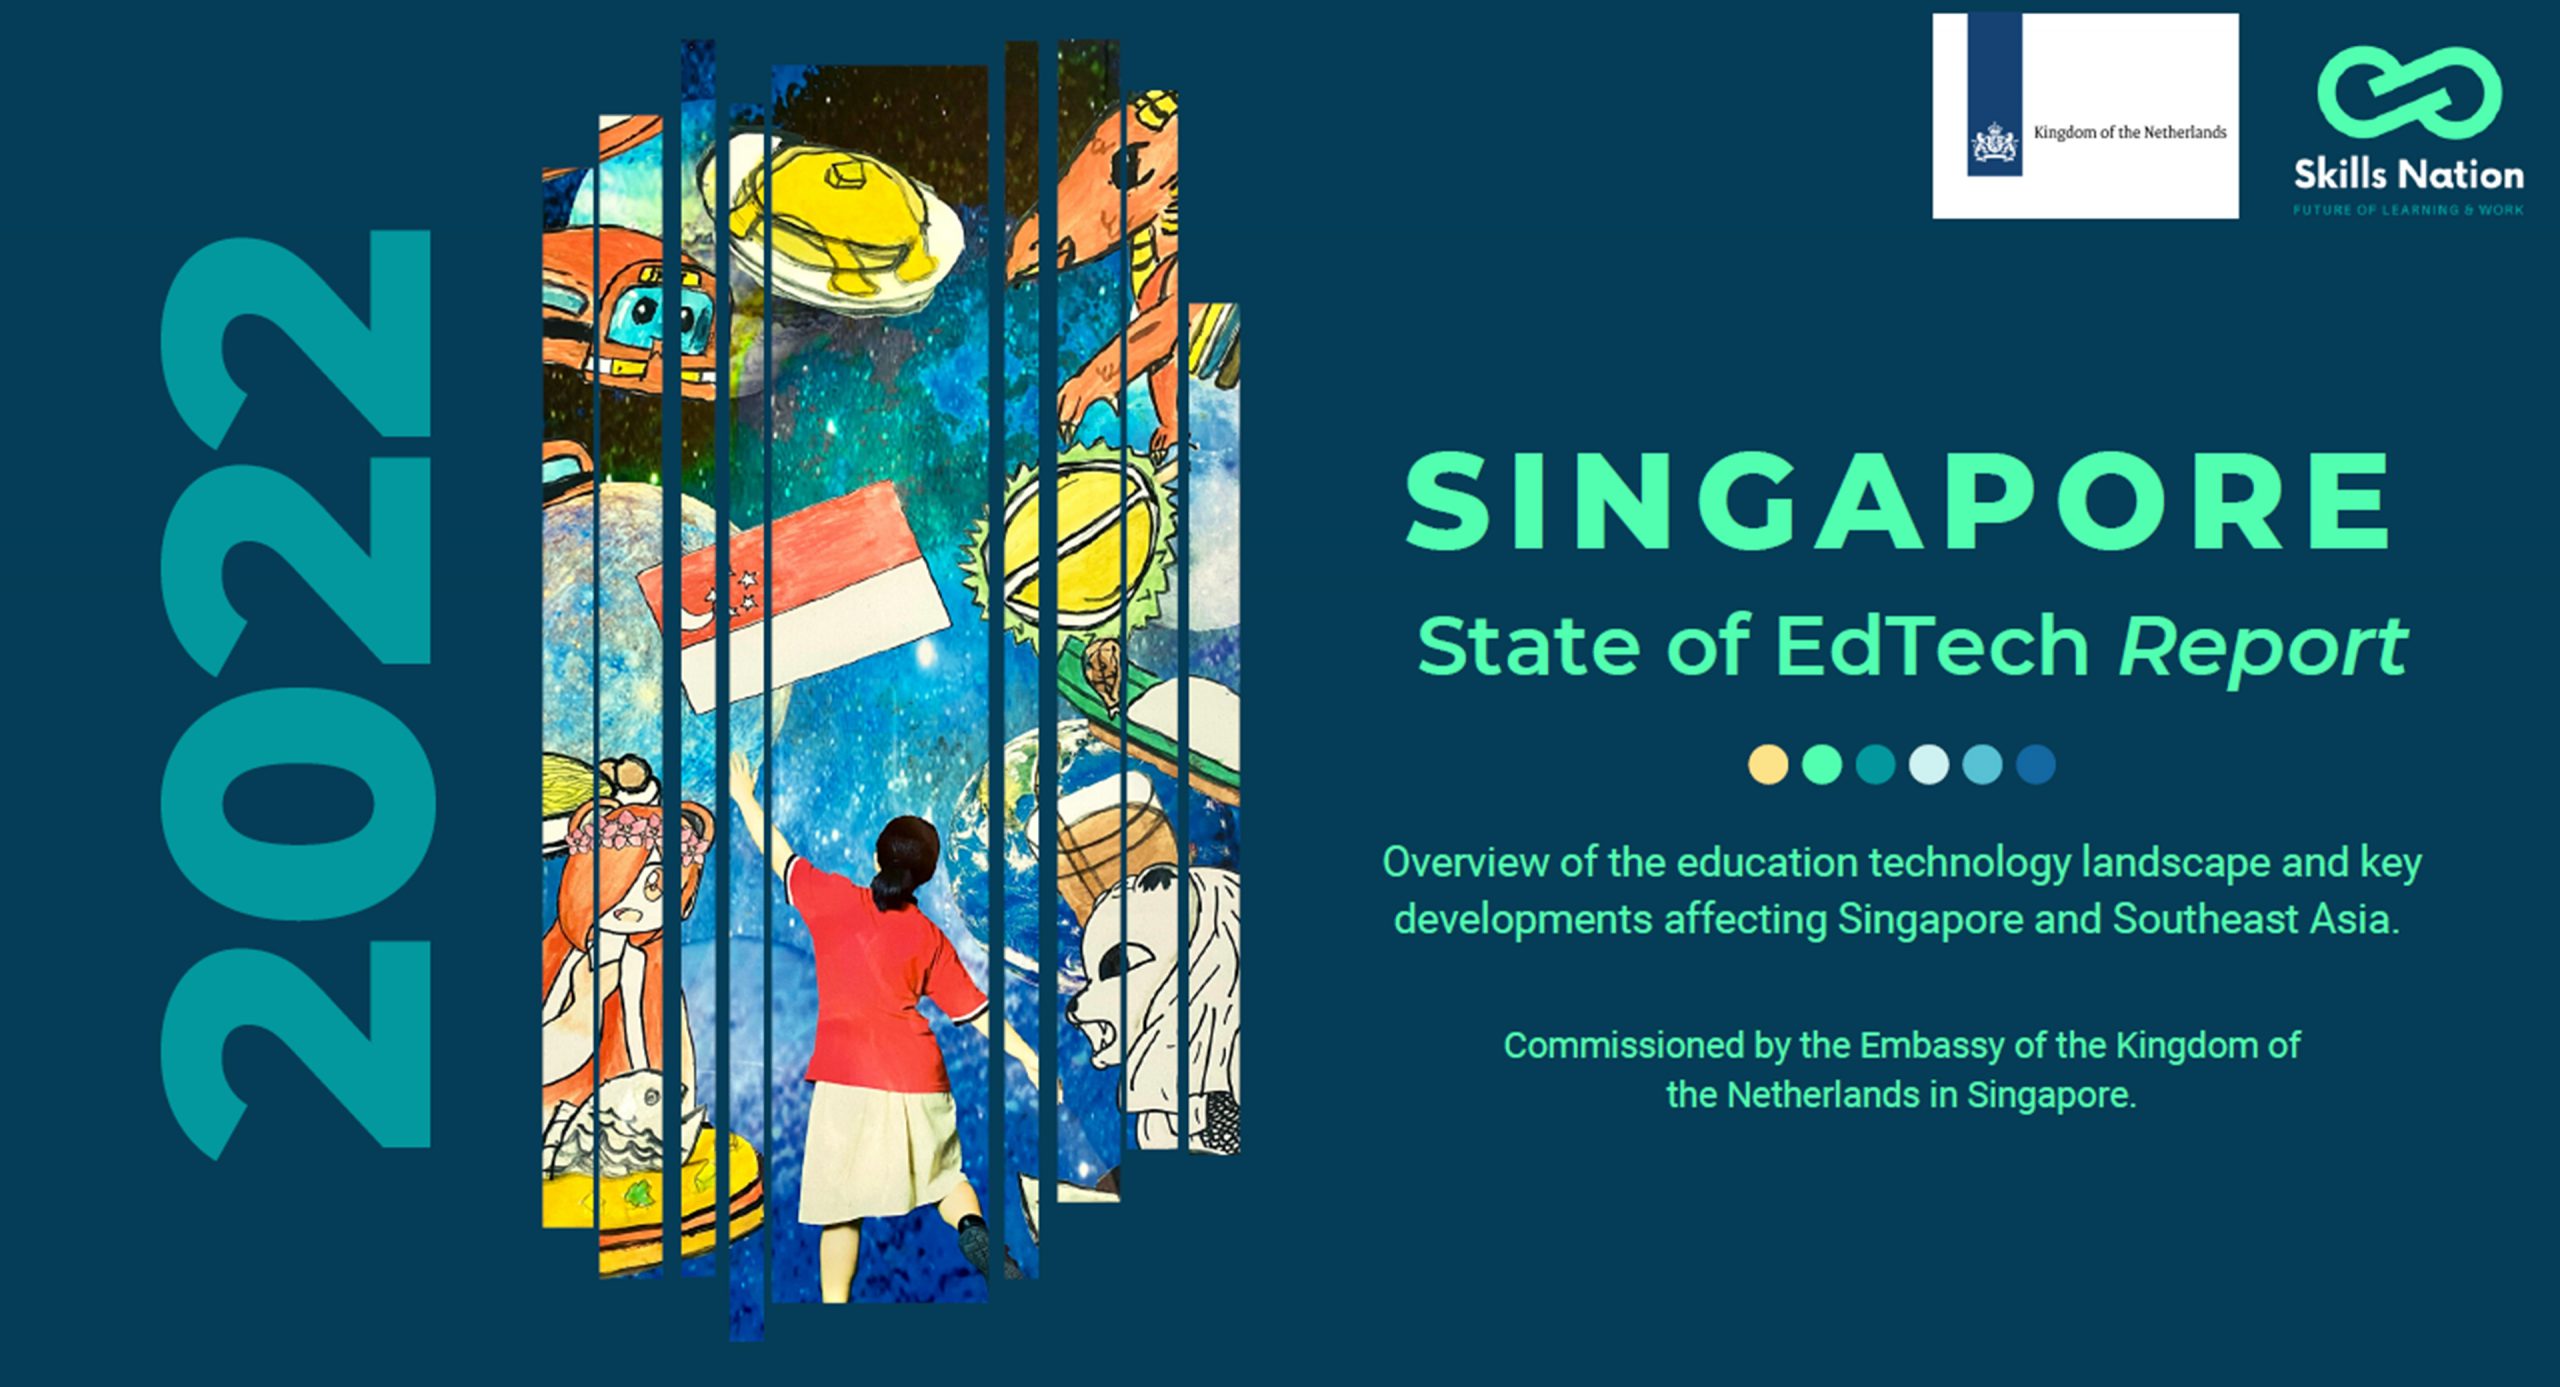 Singapore State of EdTech Report